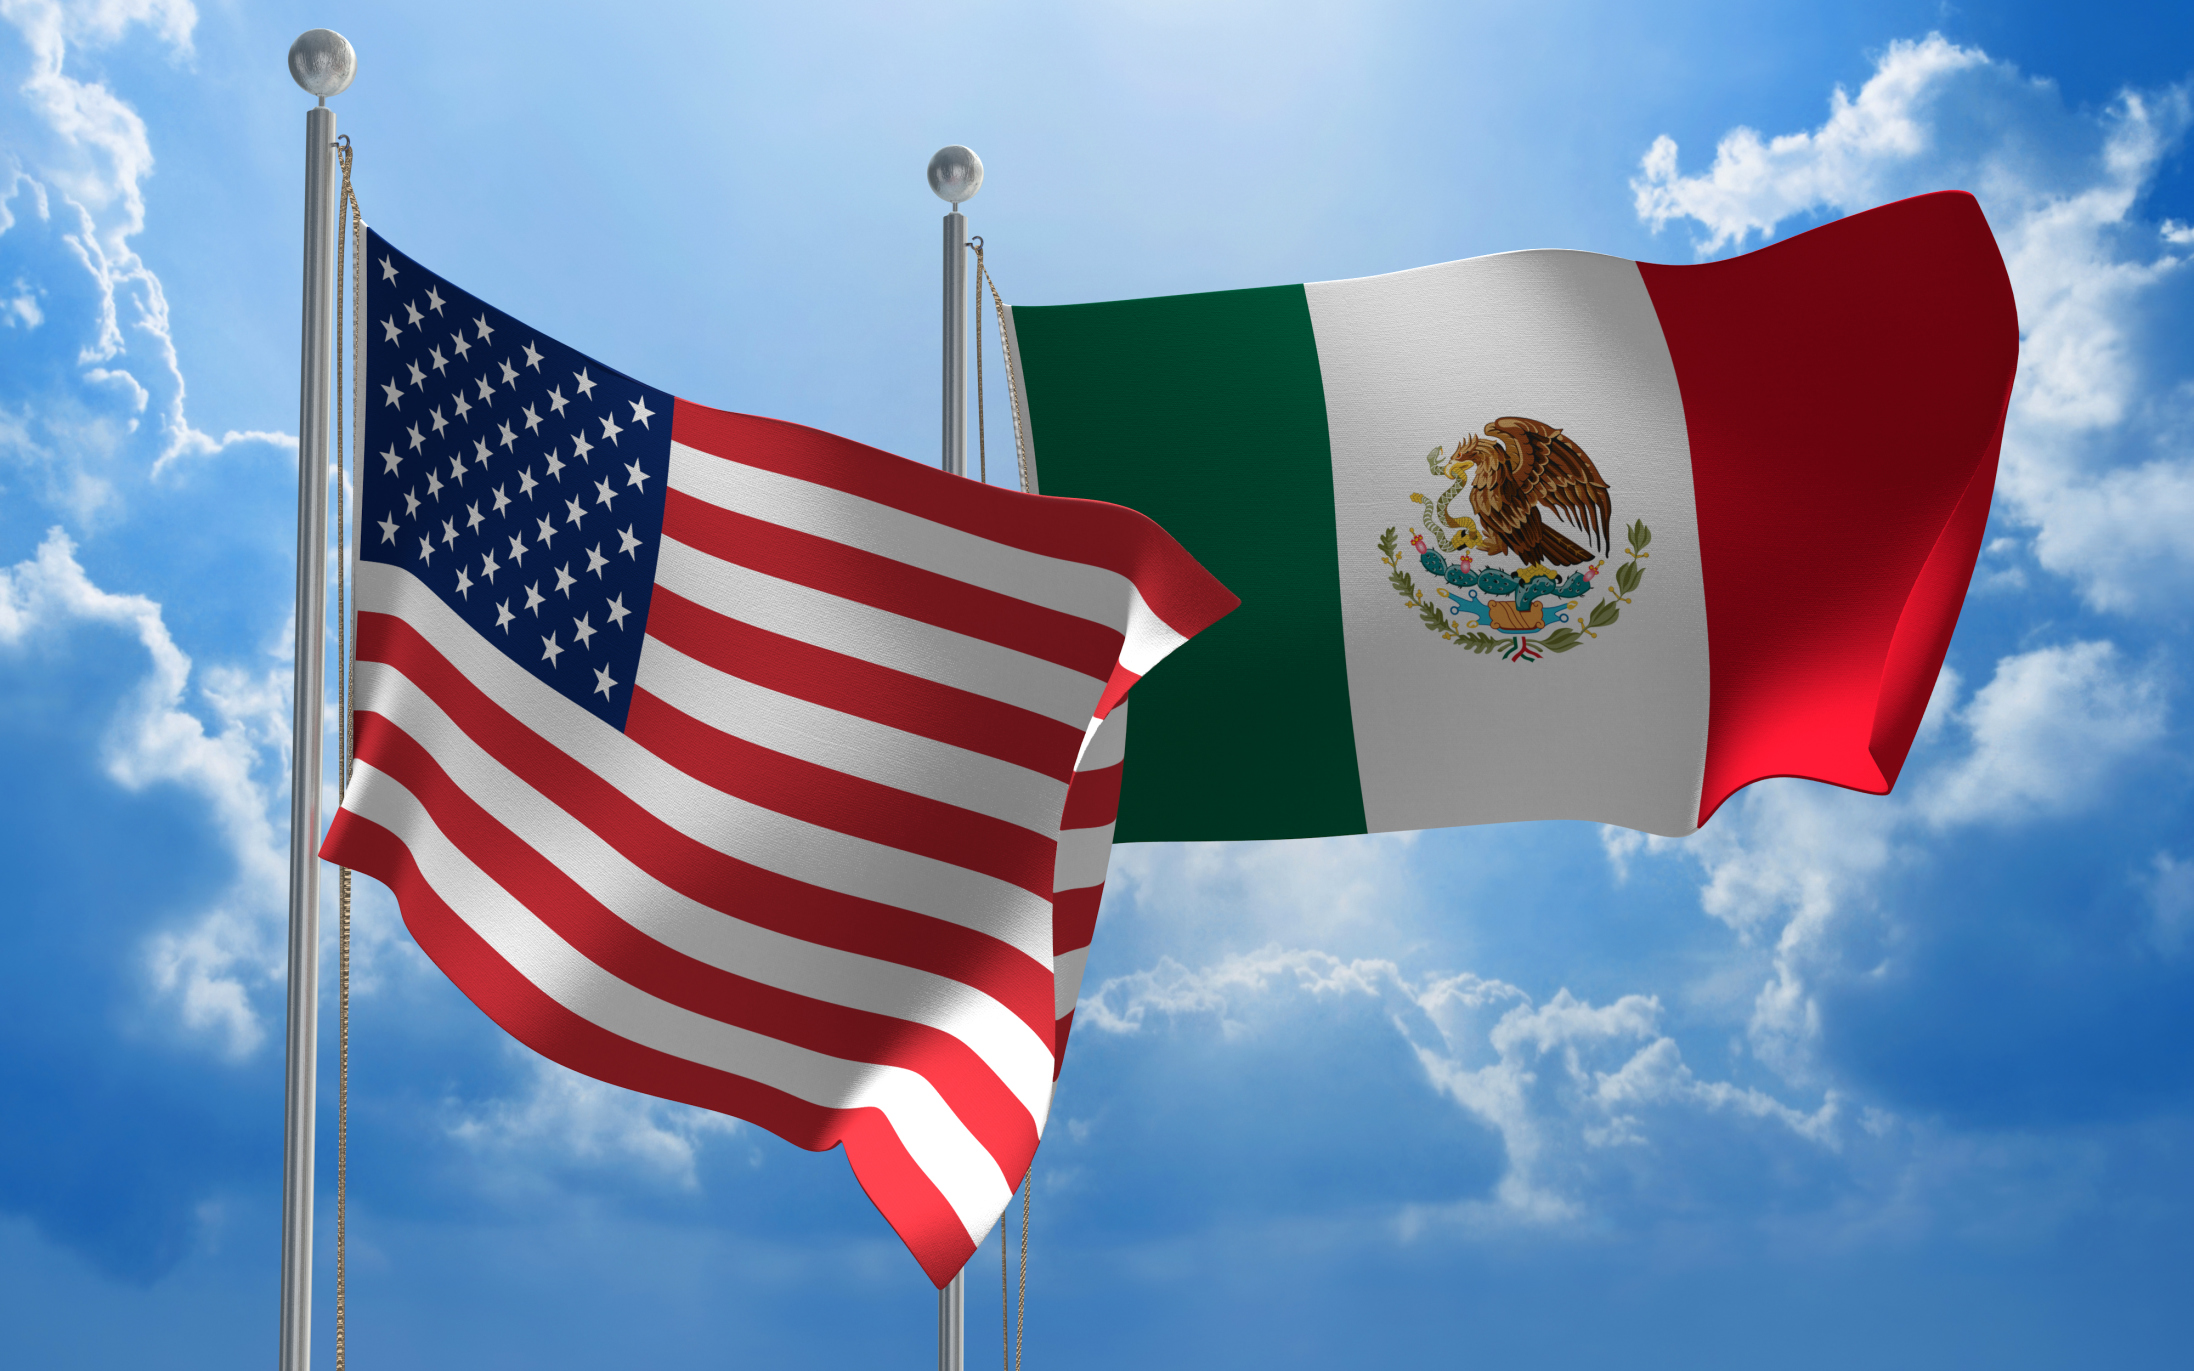 Mexico remains as the U.S.’s main trading partner